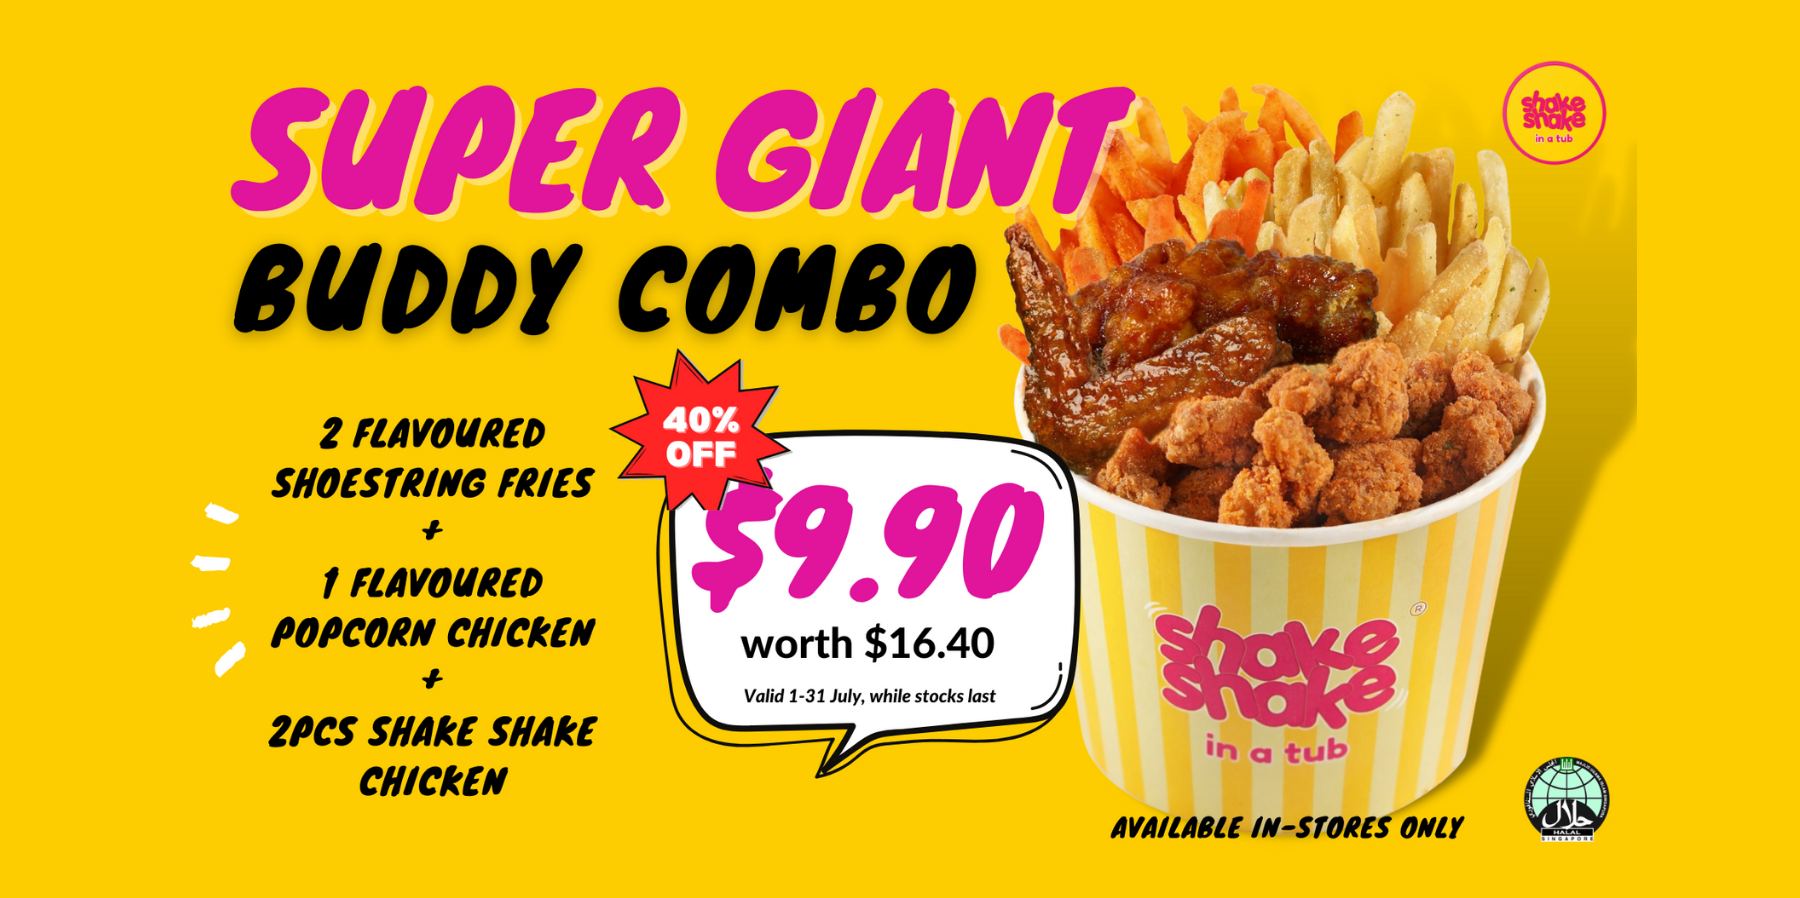 $1.10 Fried Chicken, $7.70 Deals and $9.90 Buddy Combo at 40% OFF at Shake Shake In A Tub